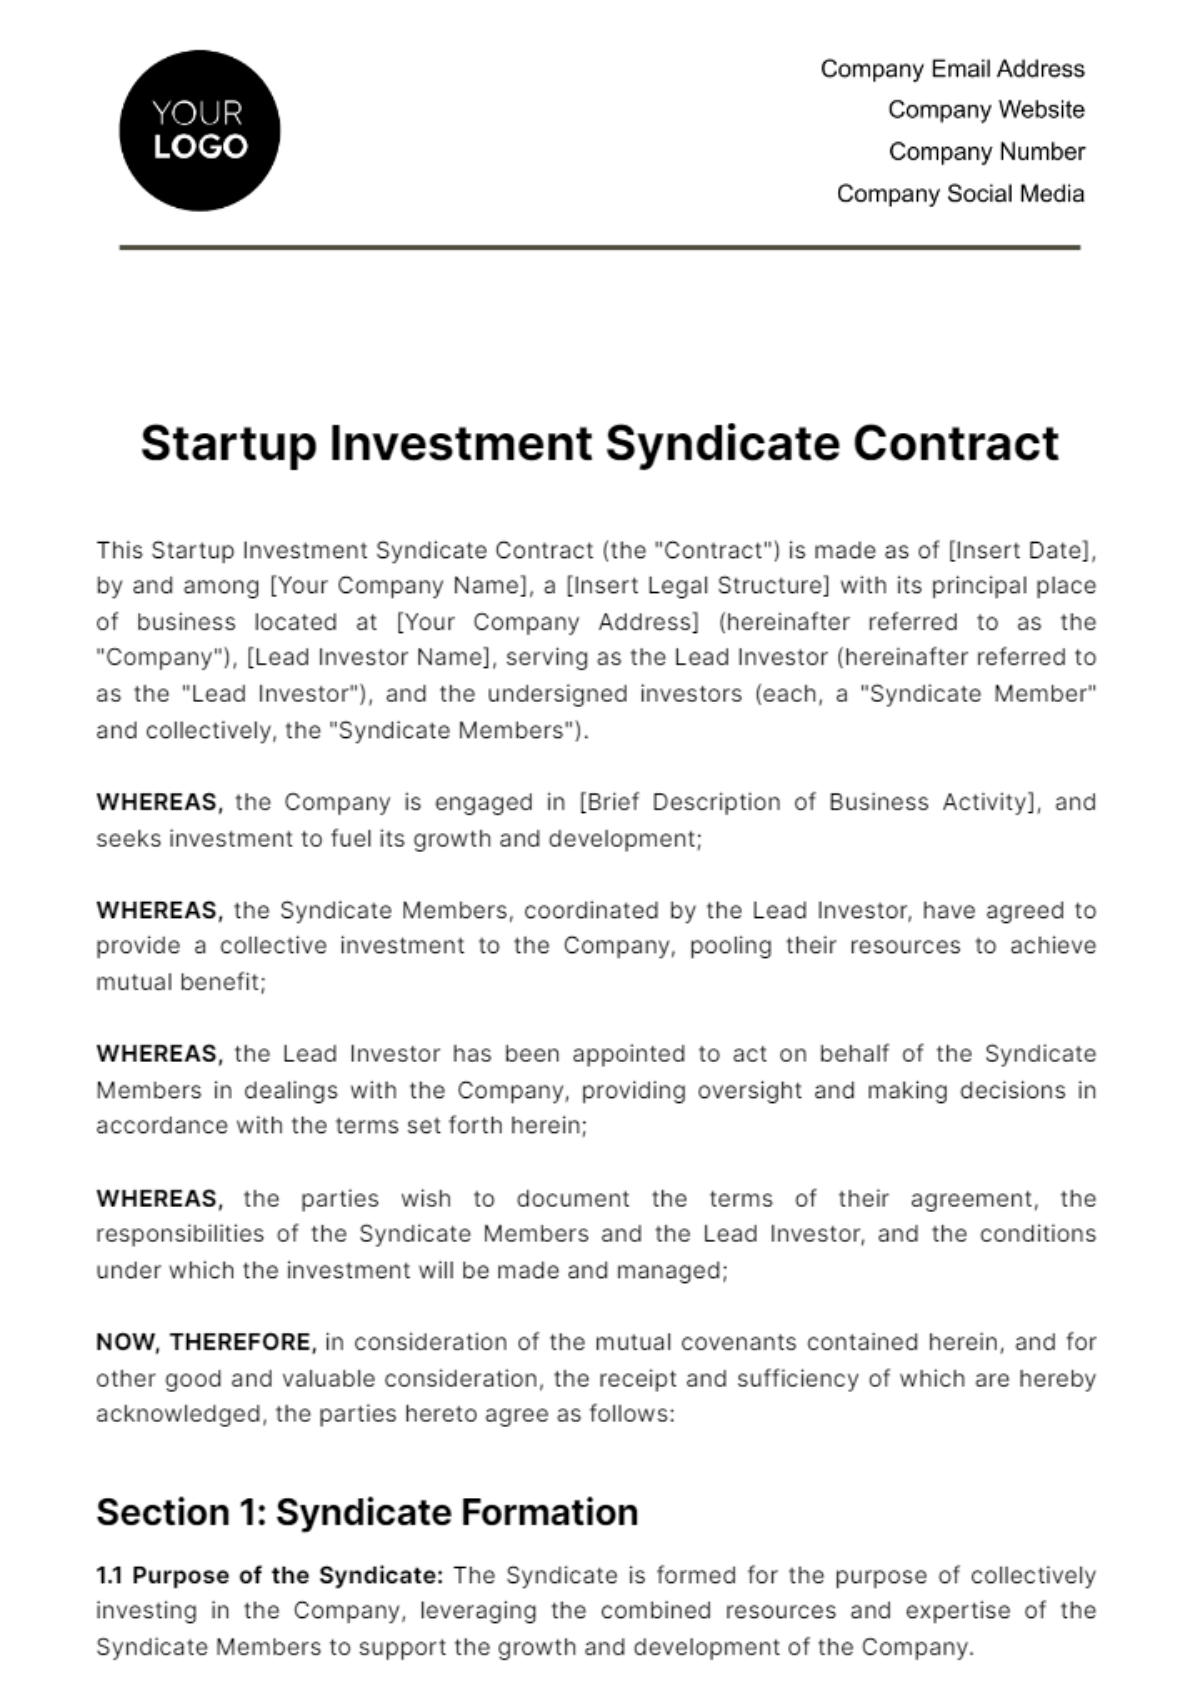 Free Startup Investment Syndicate Contract Template